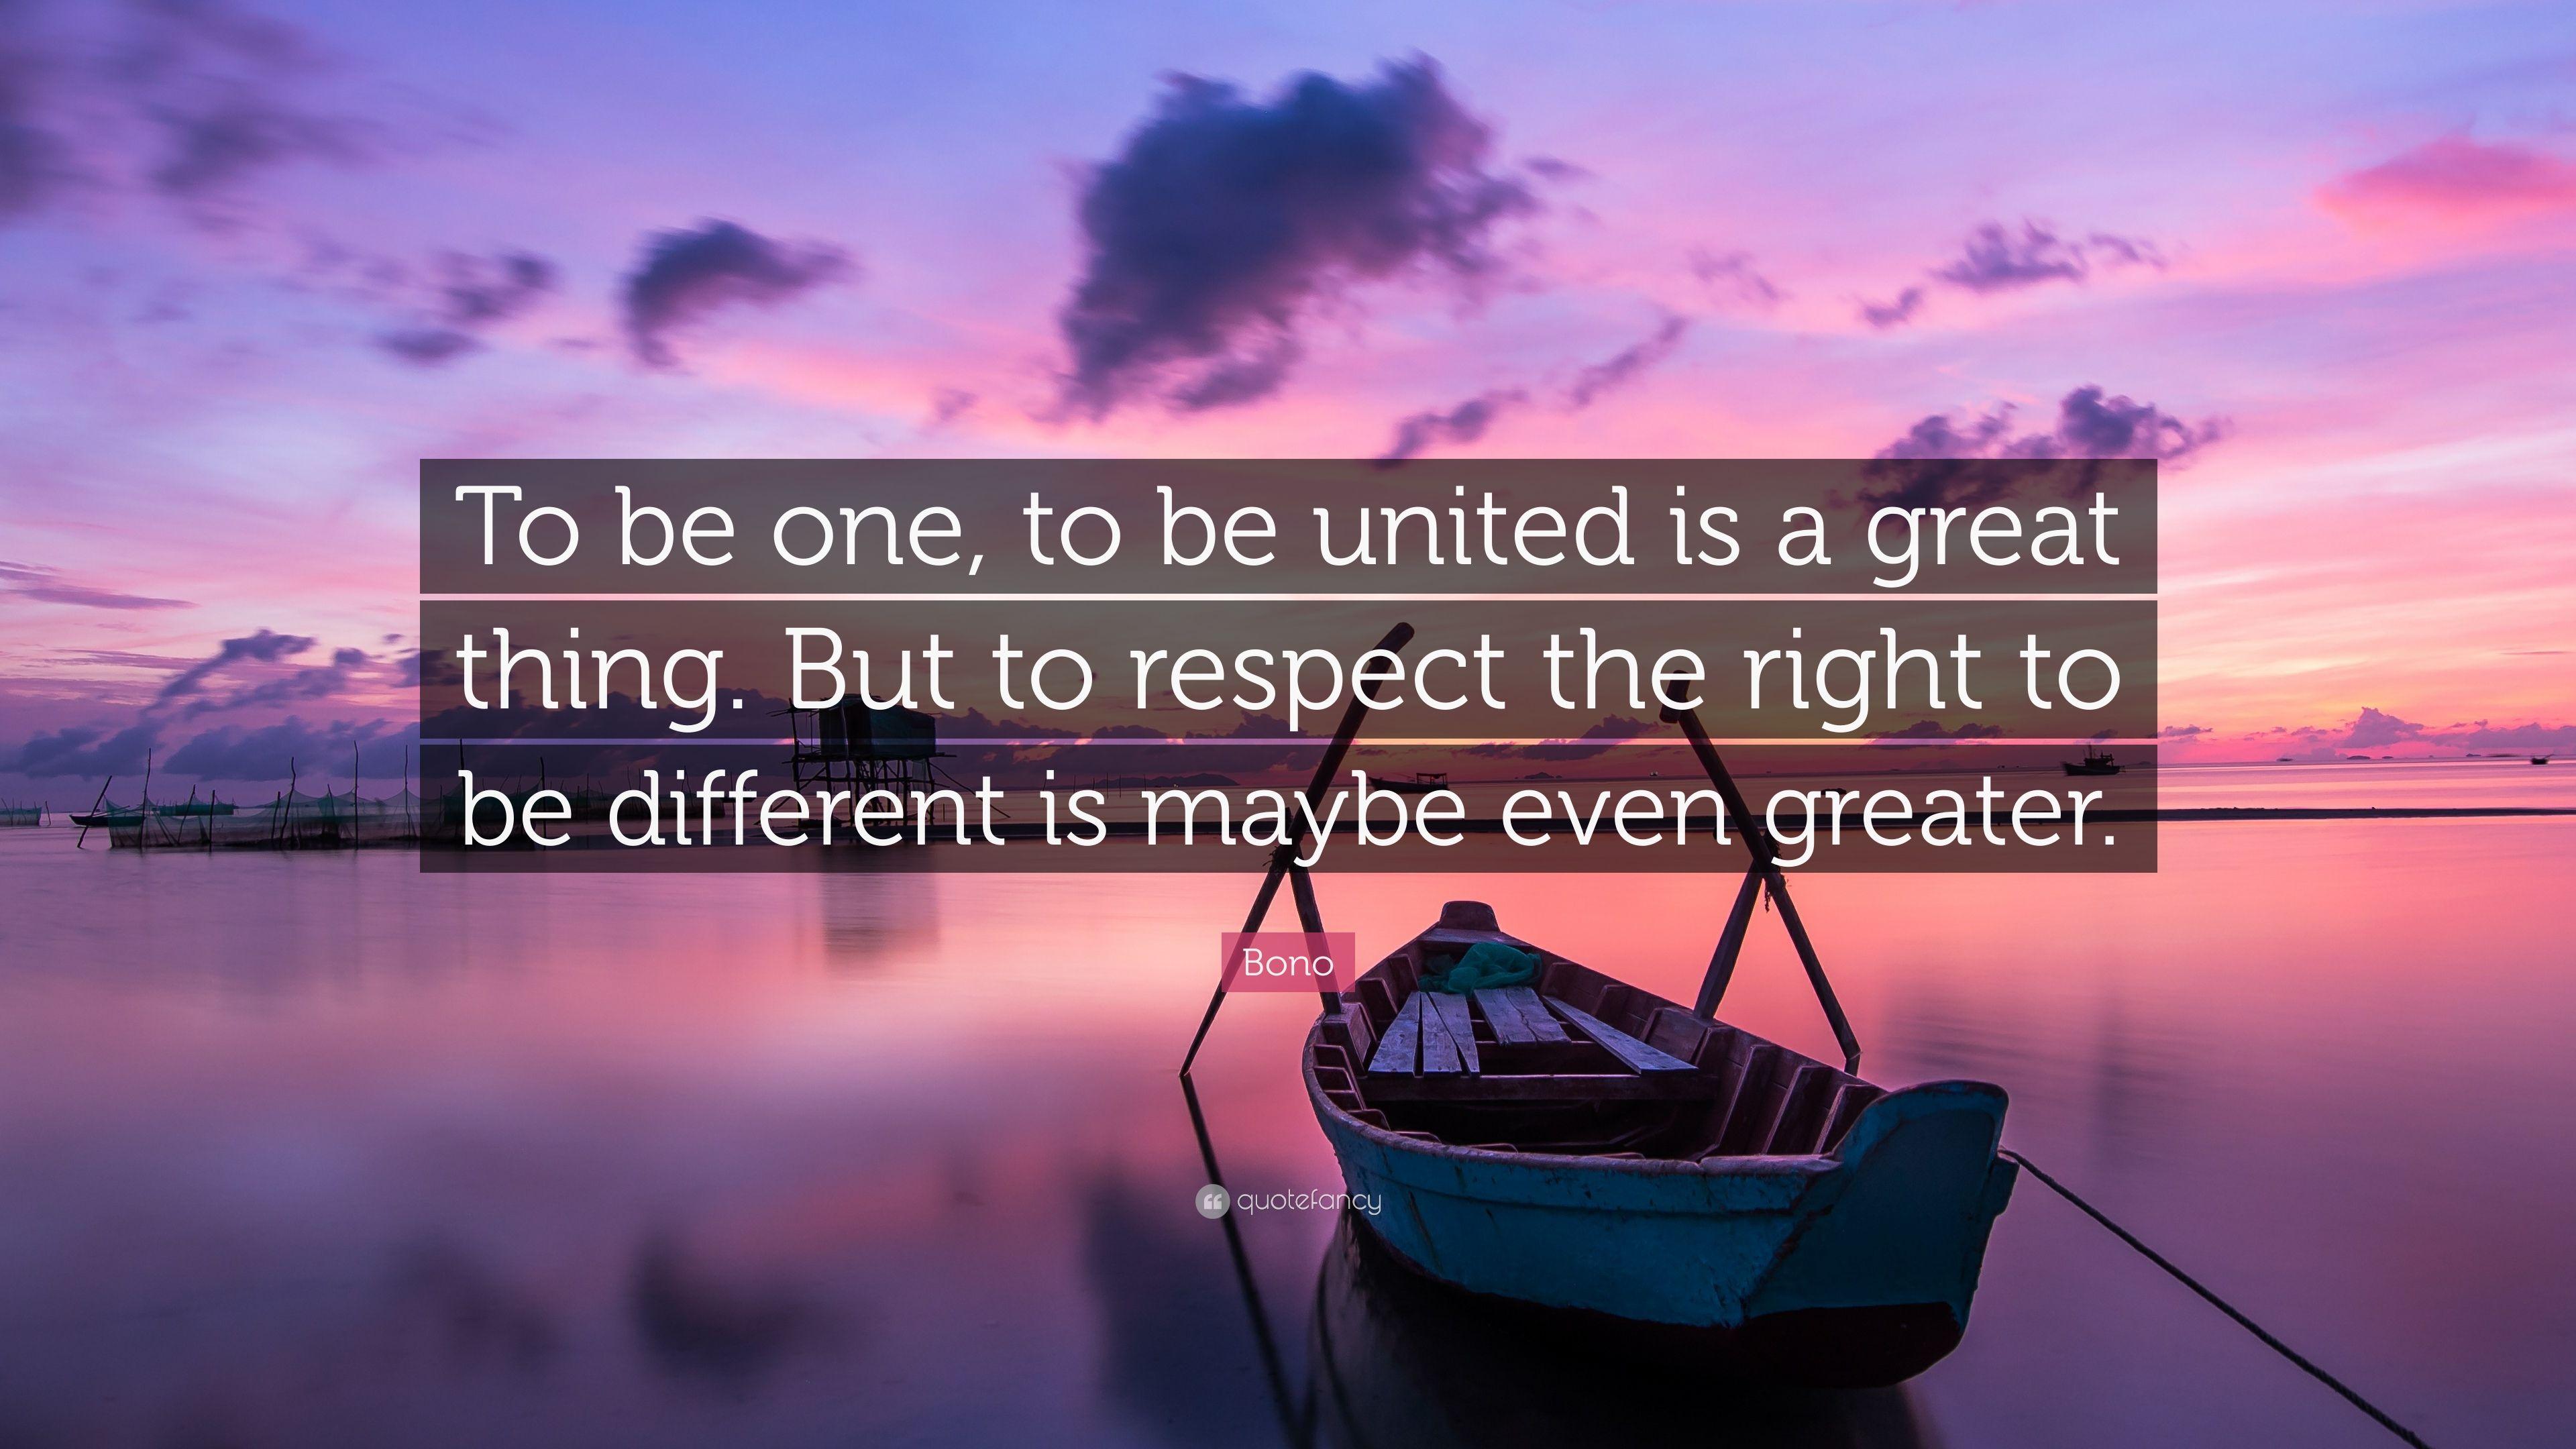 Bono Quote: “To be one, to be united is a great thing. But to